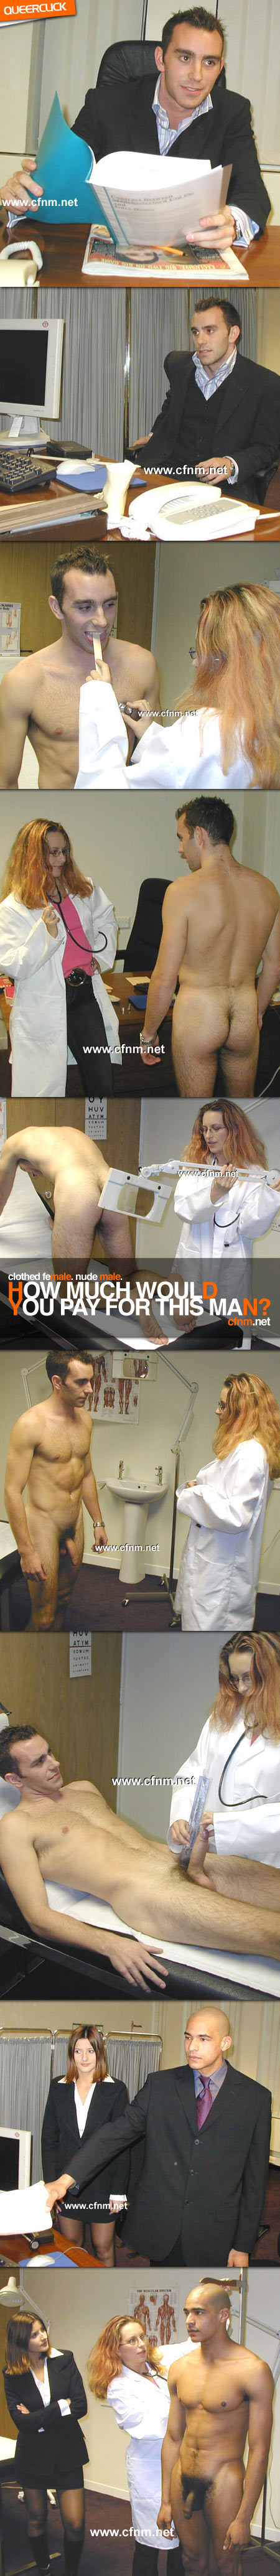 CFNM.net: How Much Would You Pay For This Man?